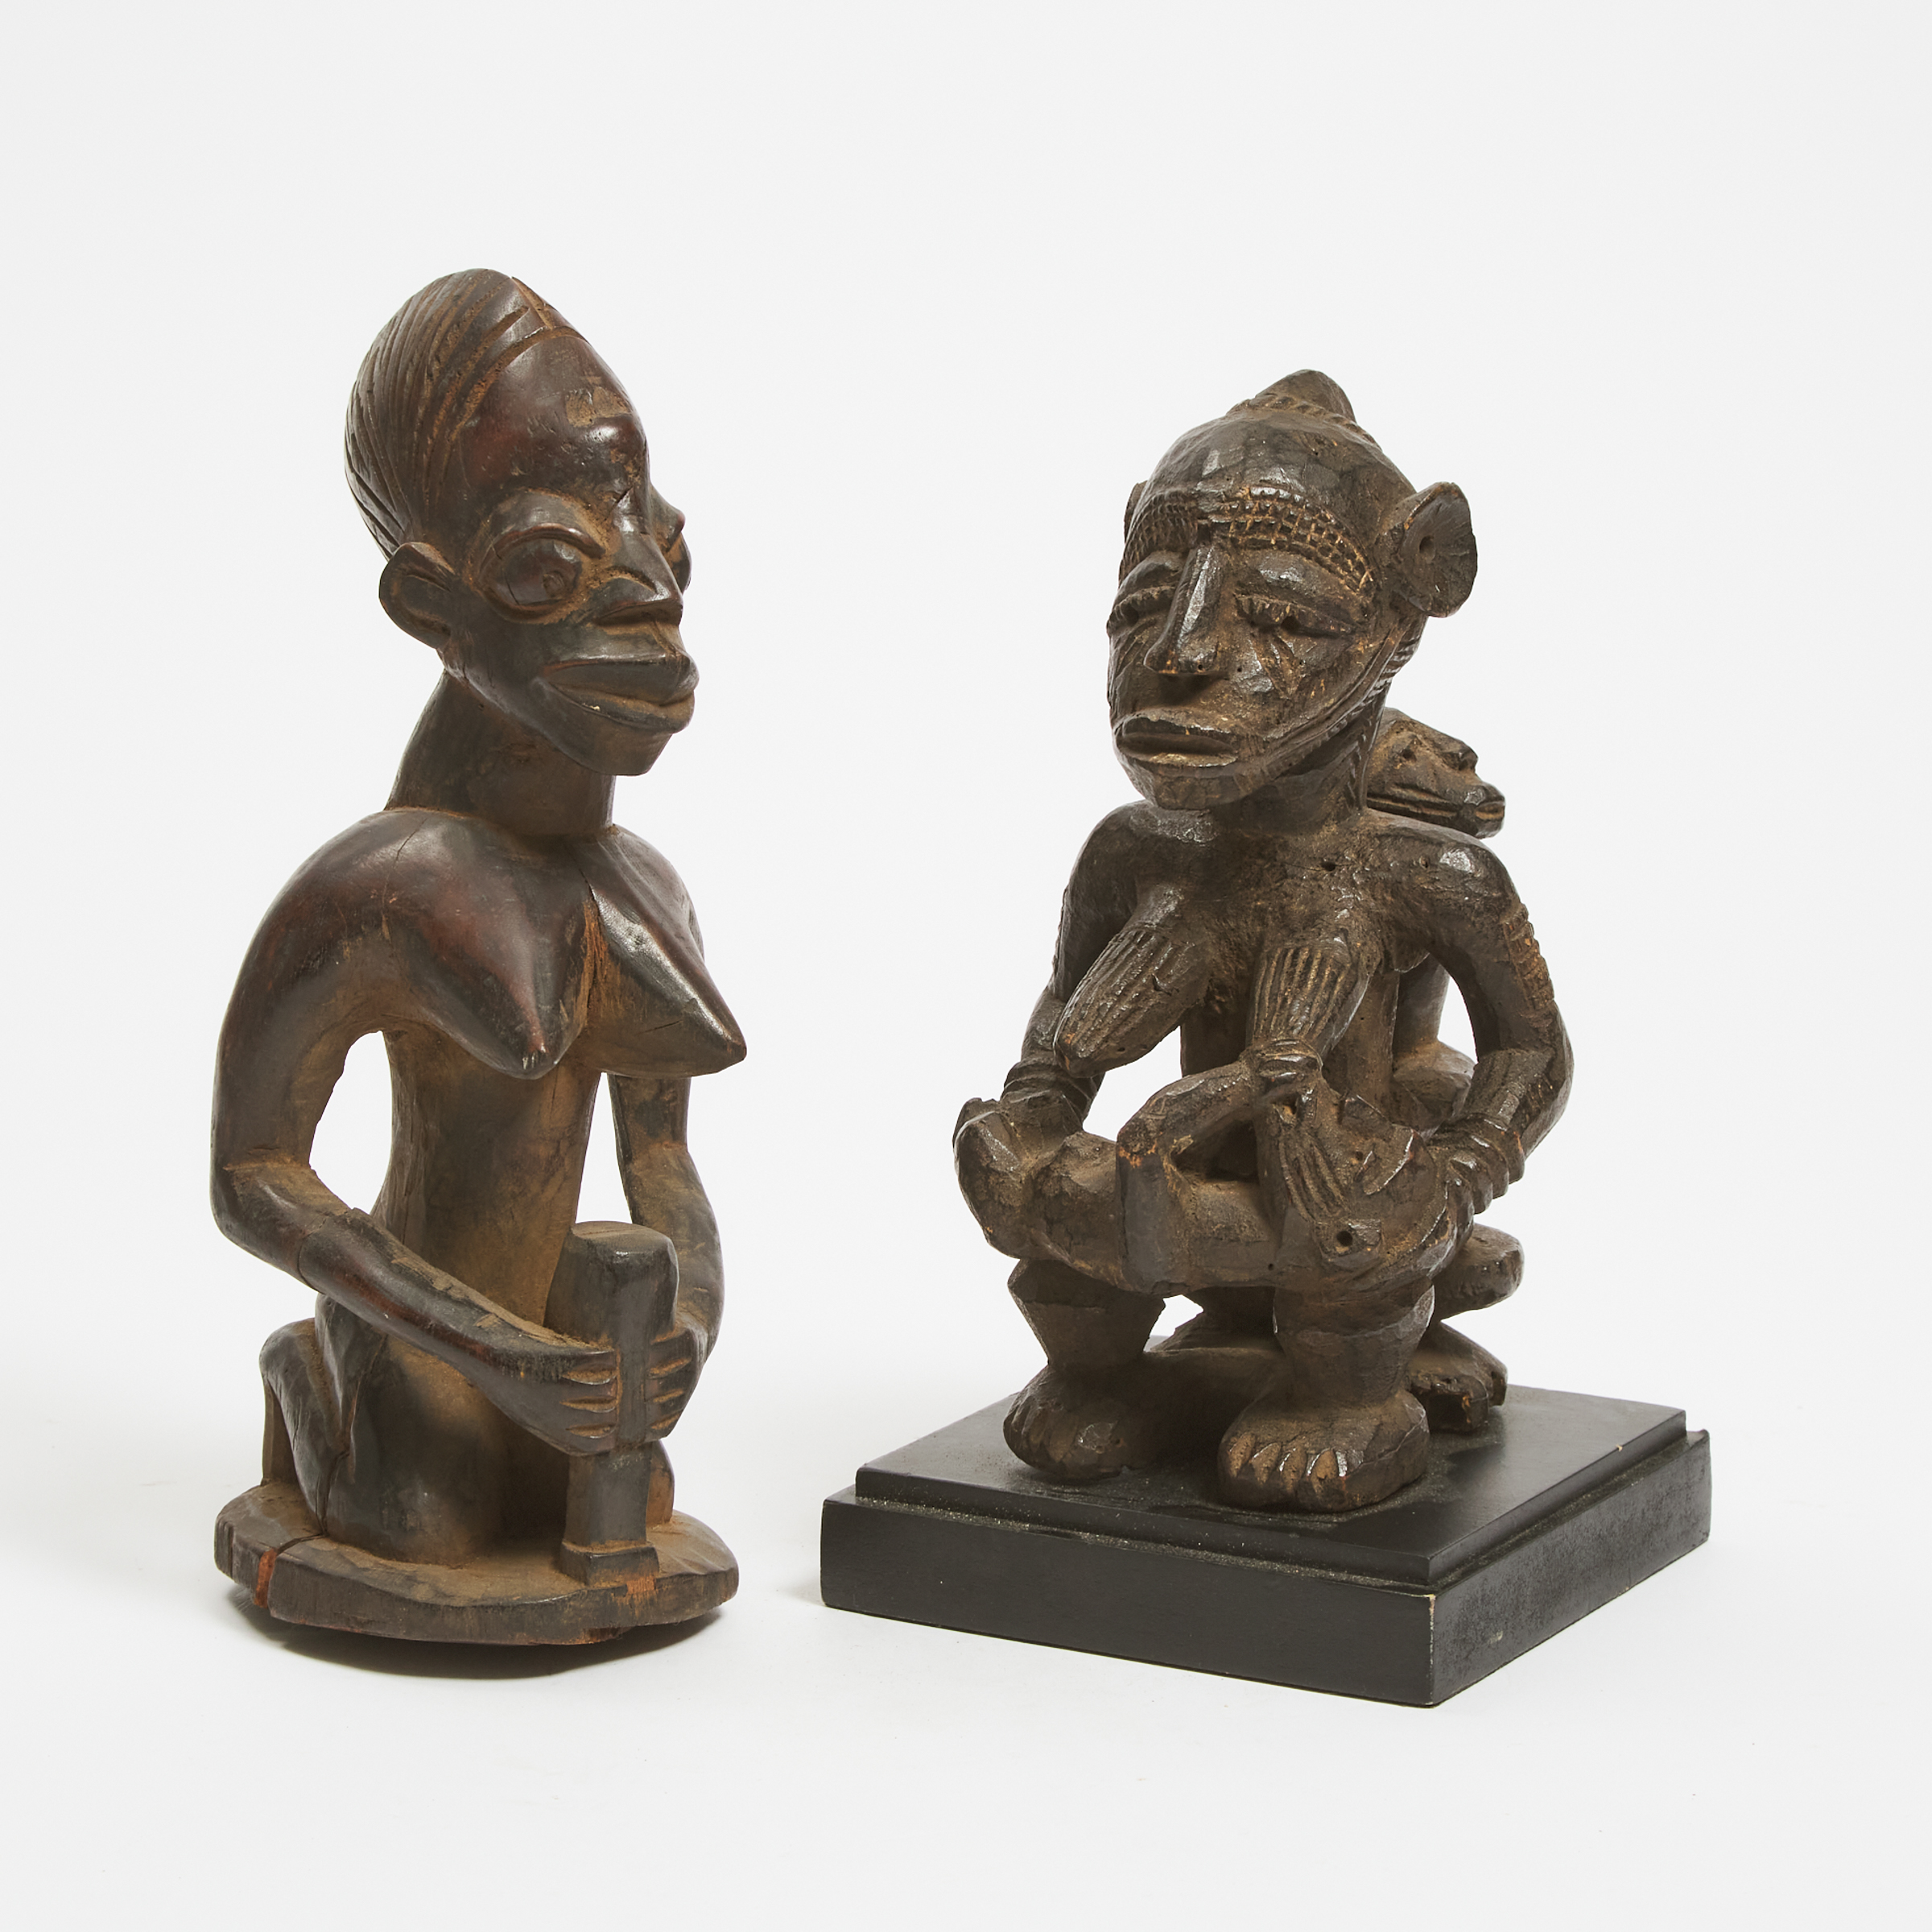 Unidentified Seated Maternity Figure, possibly Baga together with a kneeling Yoruba female figure, 20th century